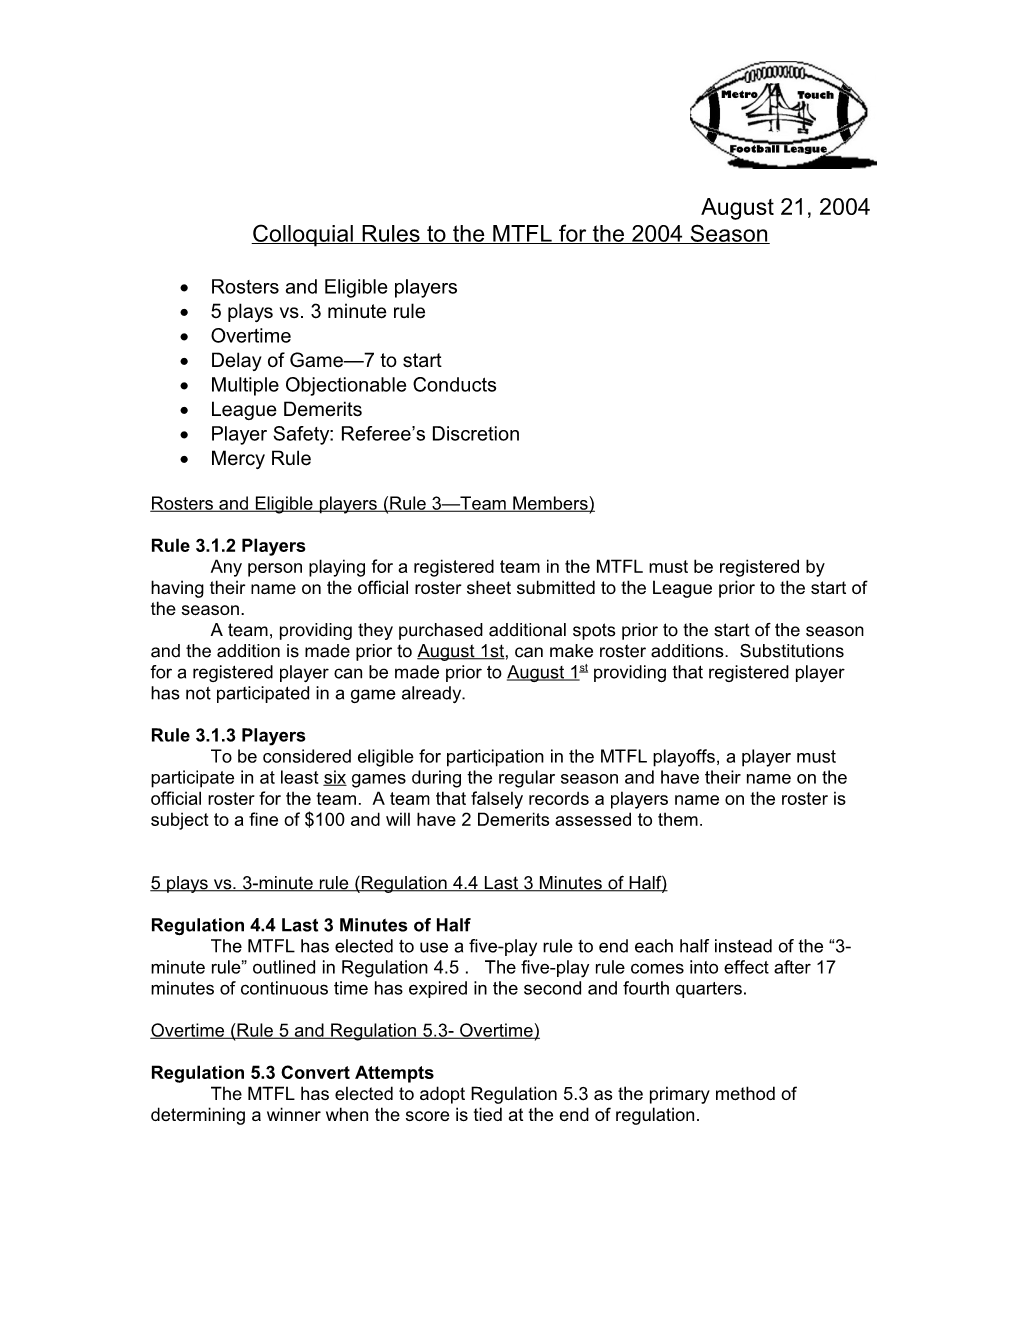 Colloquial Rules to the MTFL for the 2004 Season